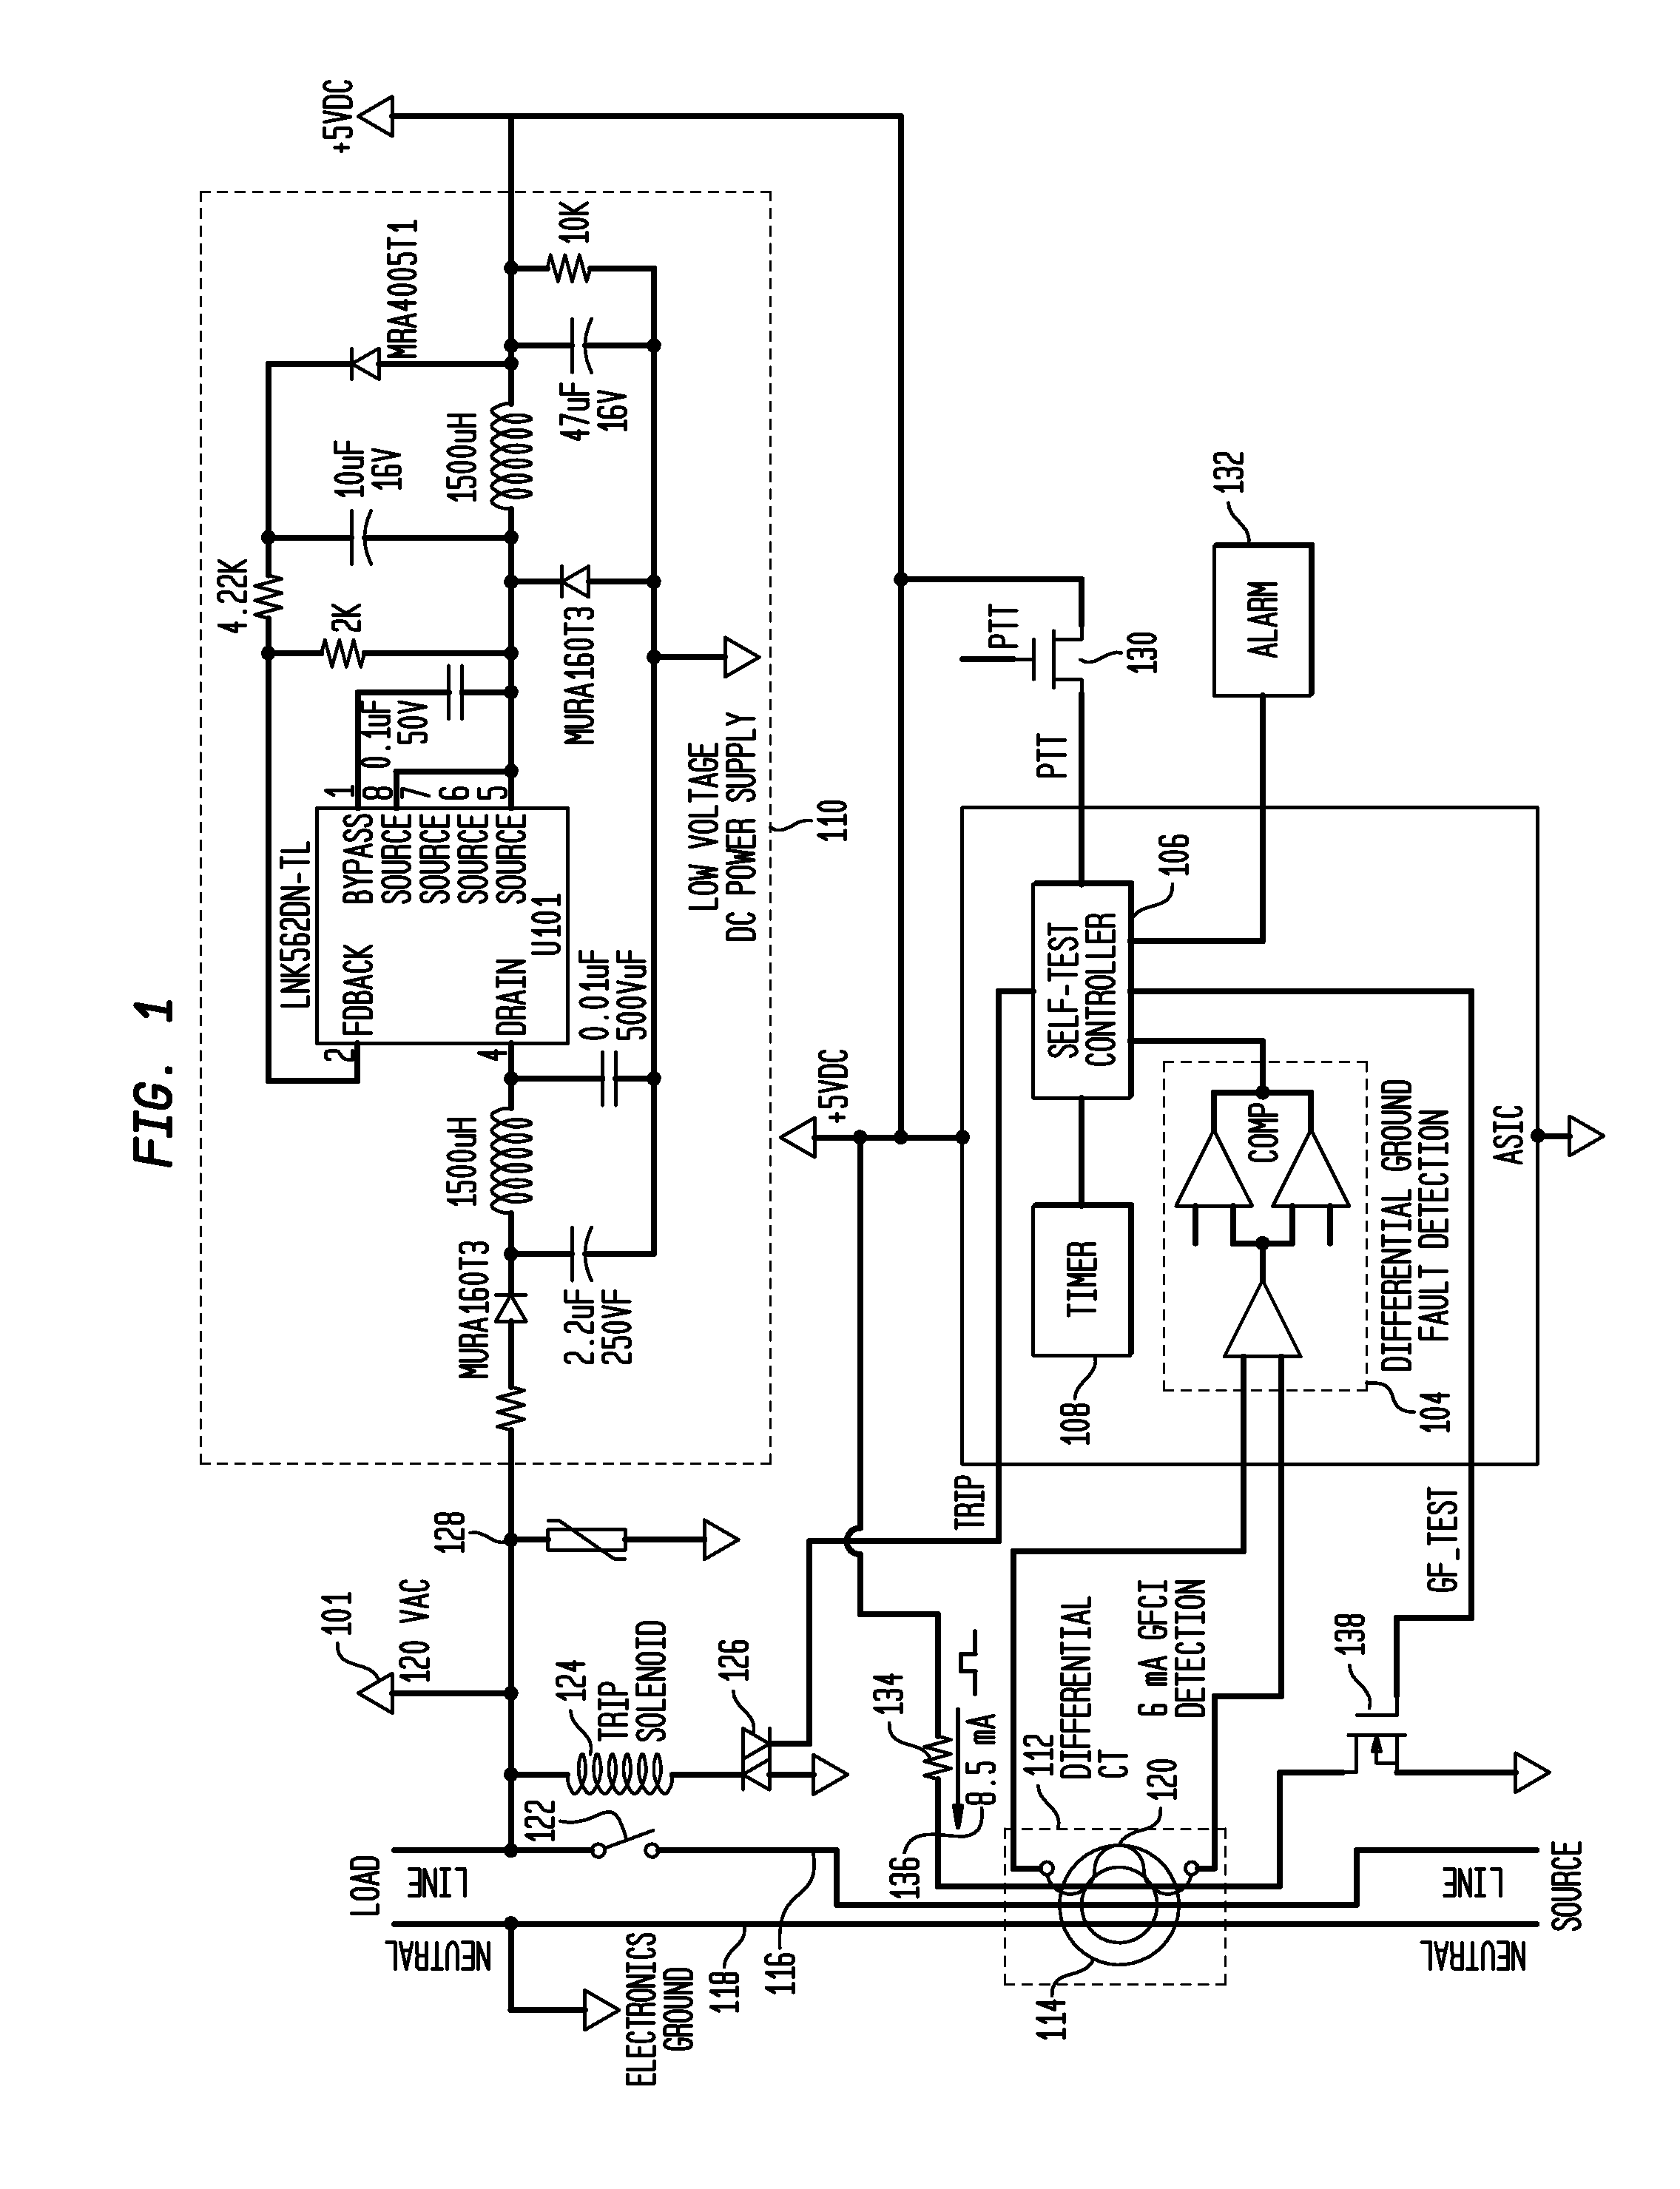 Method and Apparatus for Supervisory Circuit for Ground Fault Circuit Interrupt Device